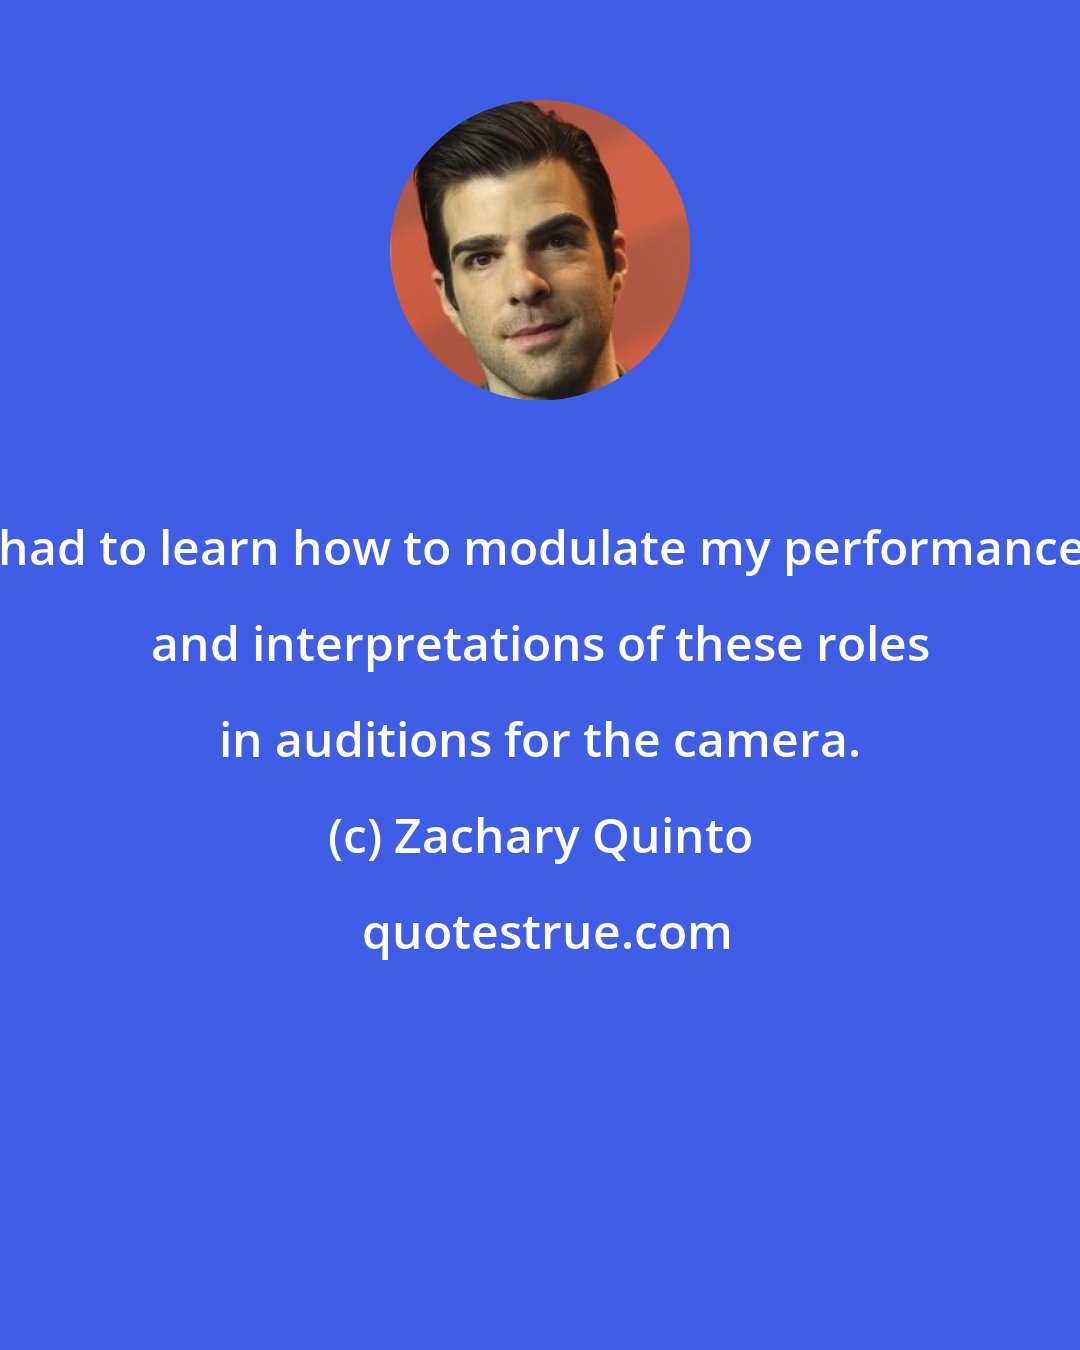 Zachary Quinto: I had to learn how to modulate my performances and interpretations of these roles in auditions for the camera.